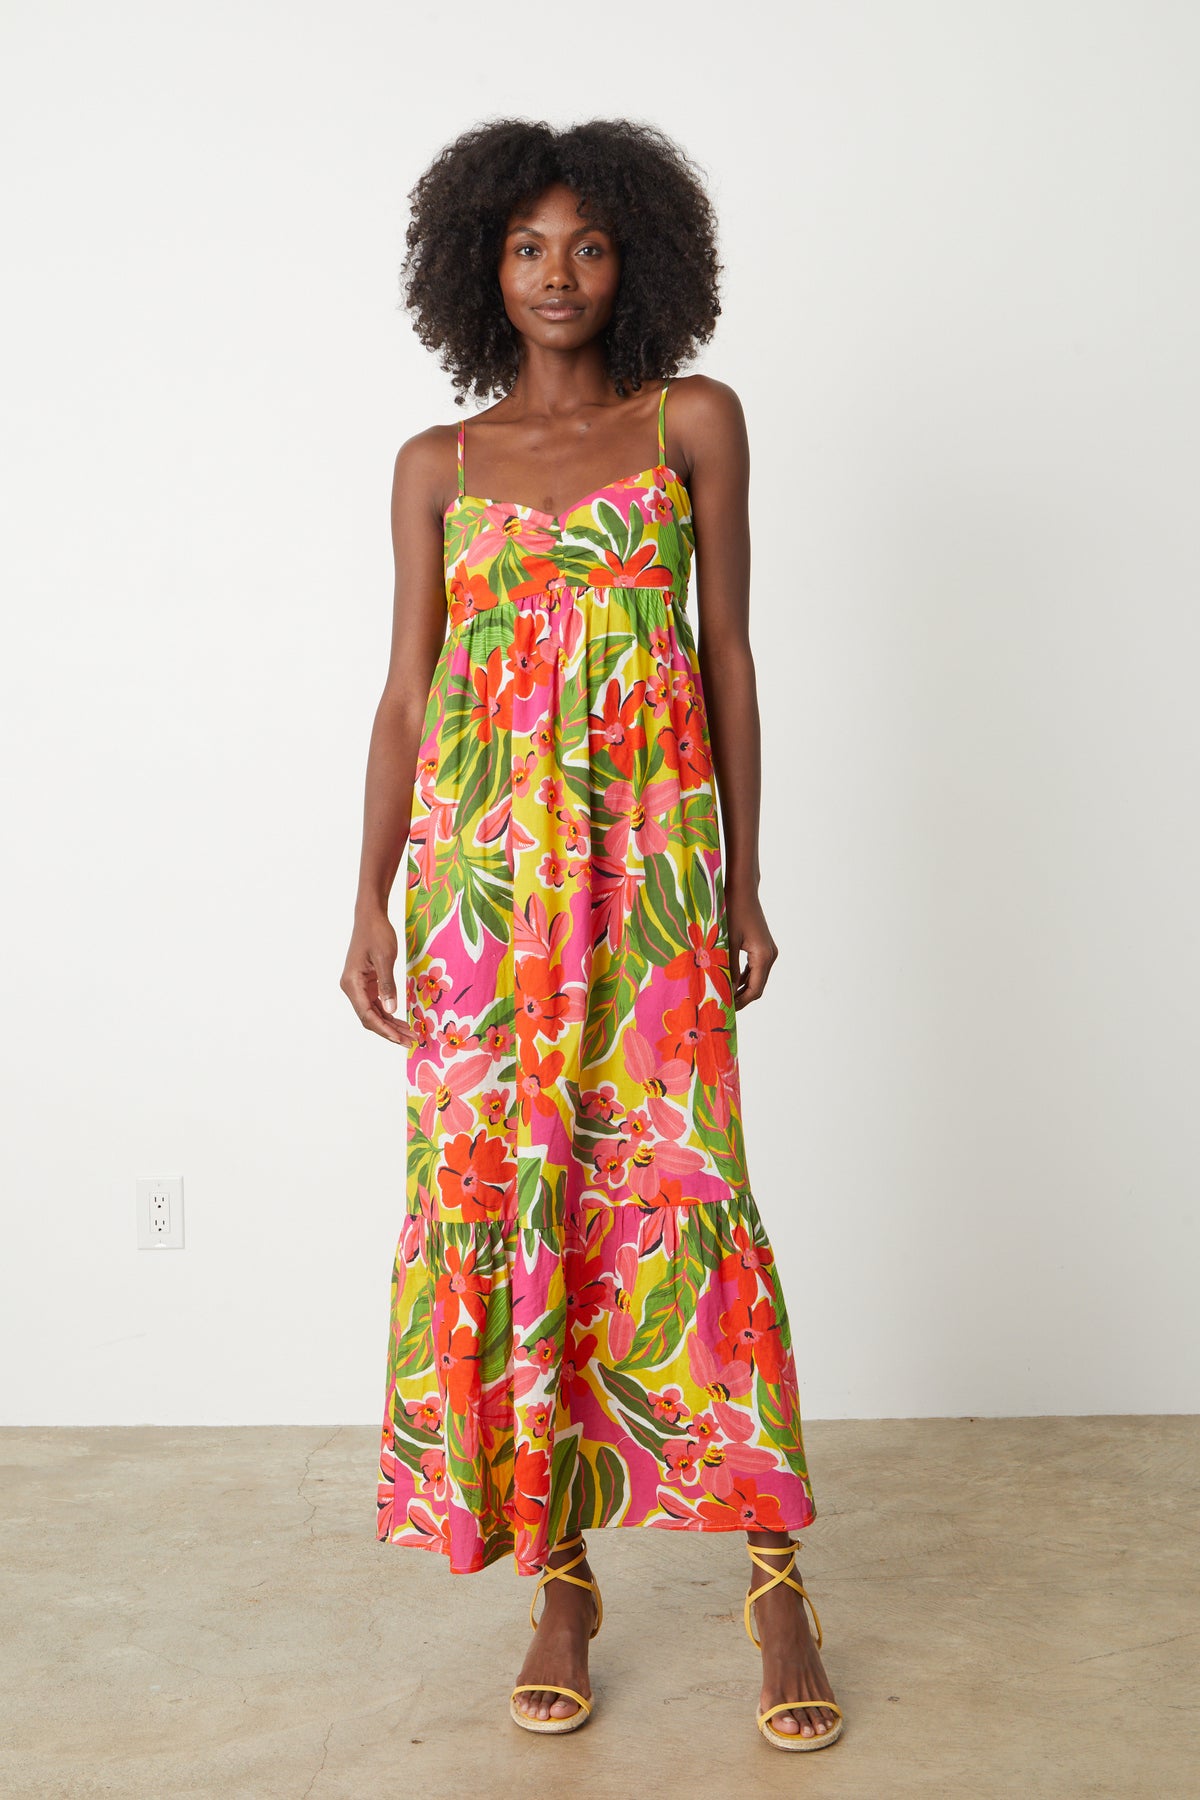 A woman wearing the Velvet by Graham & Spencer KAYLA PRINTED MAXI DRESS.-26774872916161